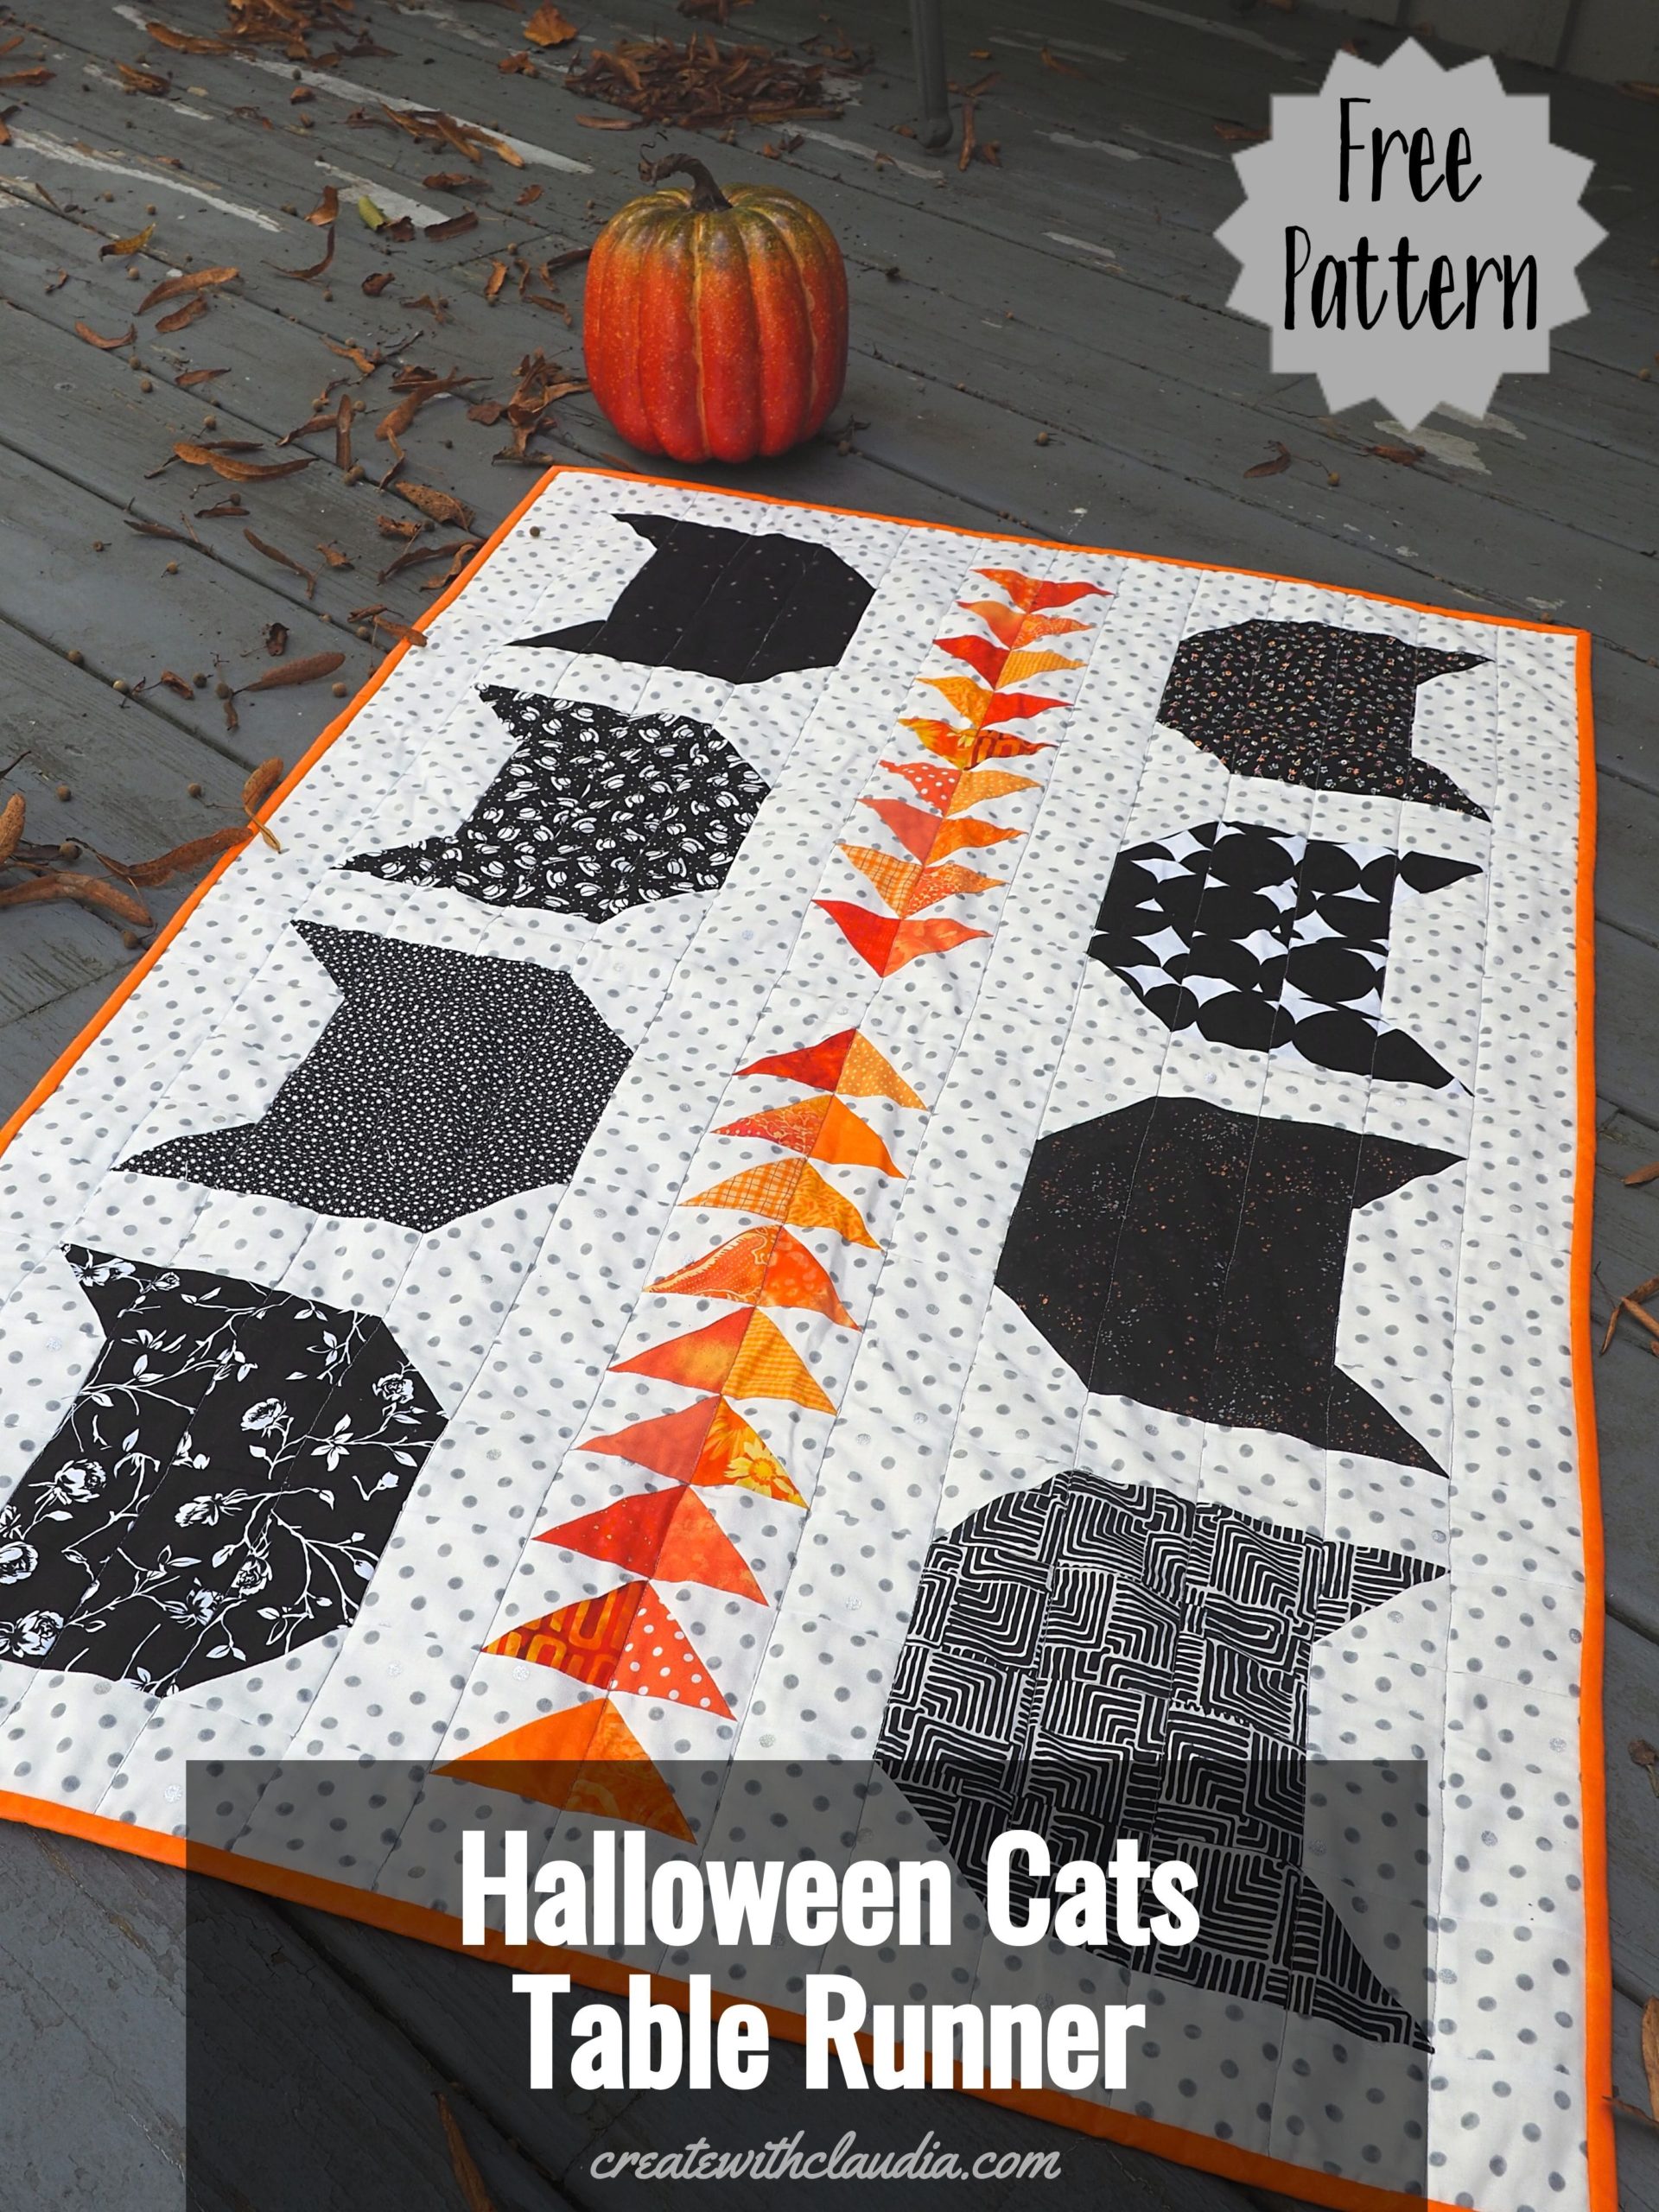 Halloween Cats Table Runner Pattern - Create with Claudia